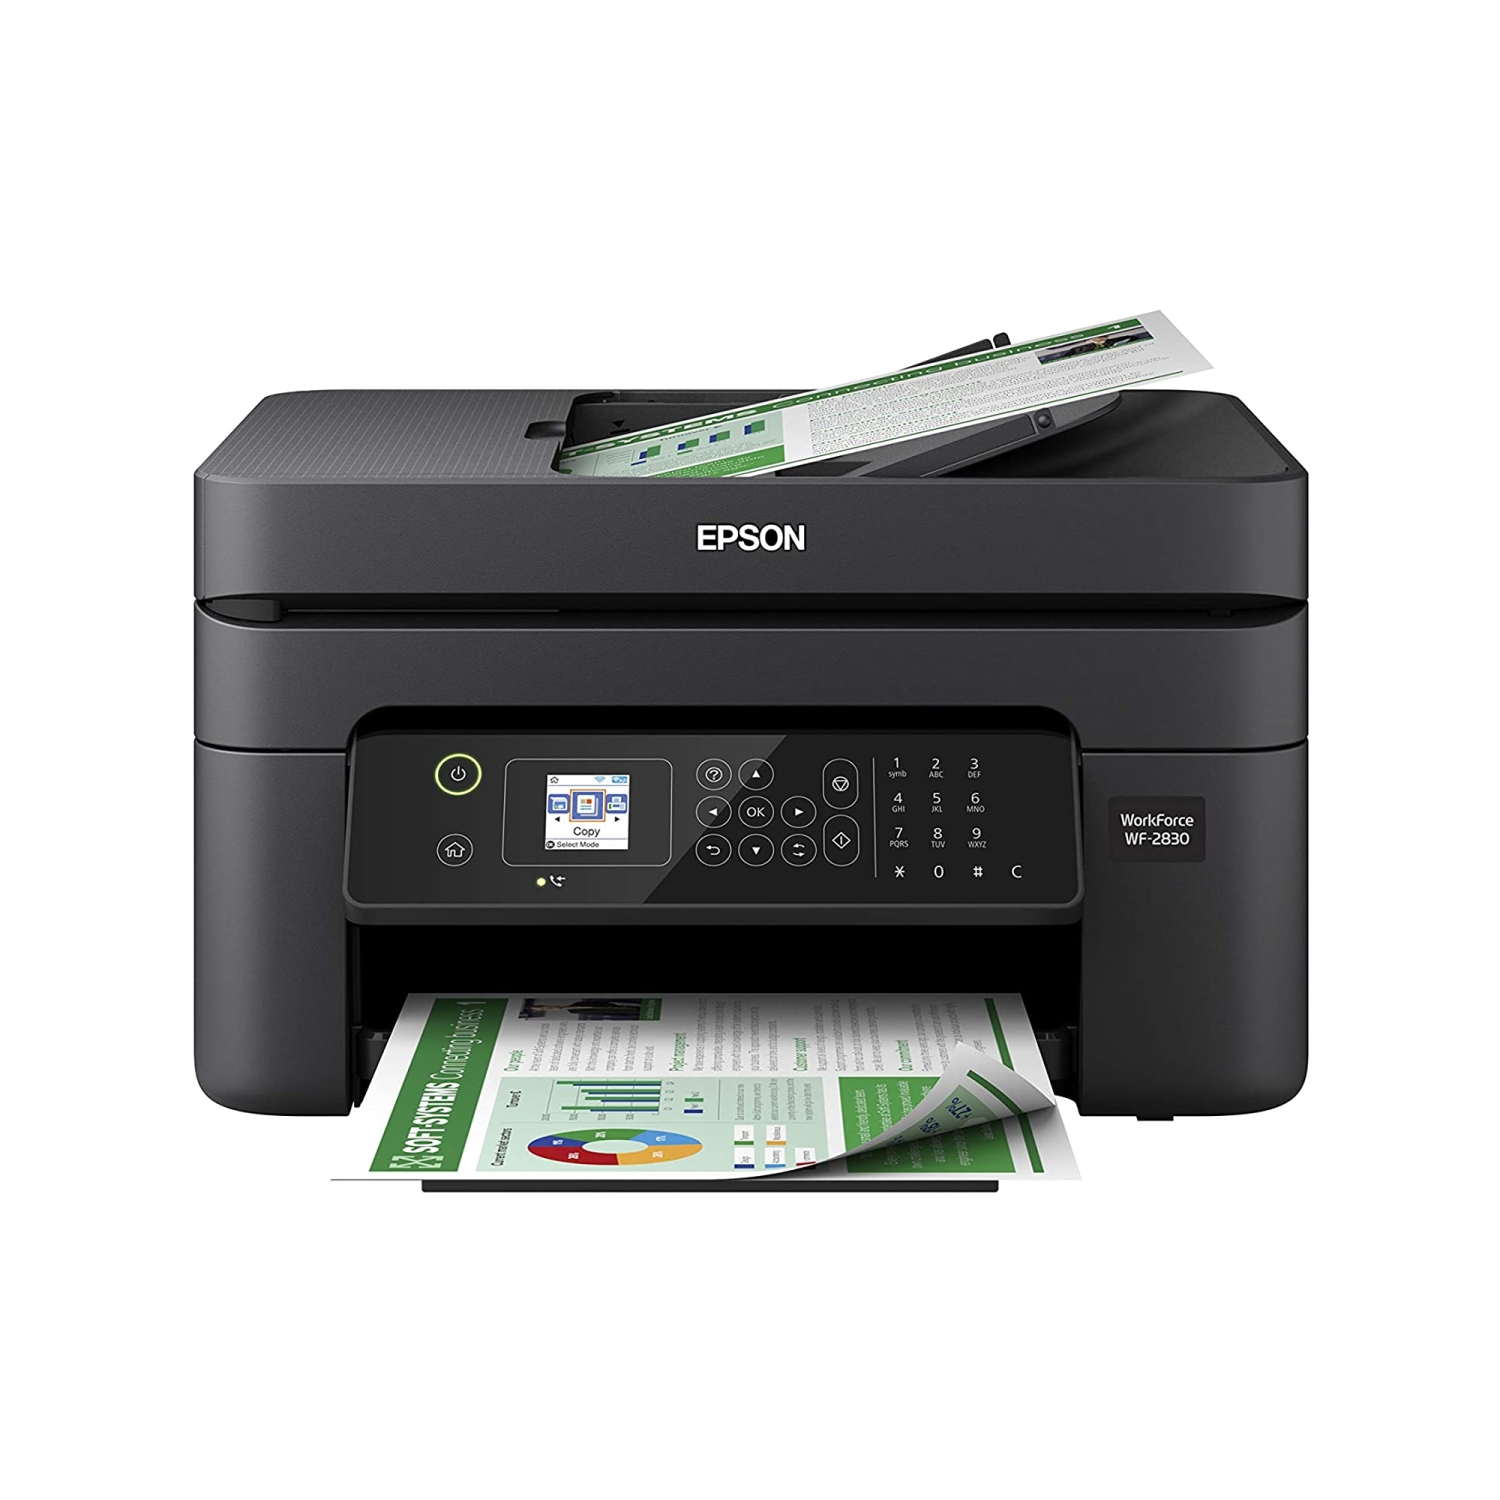 Epson WorkForce WF-2830 All-in-One